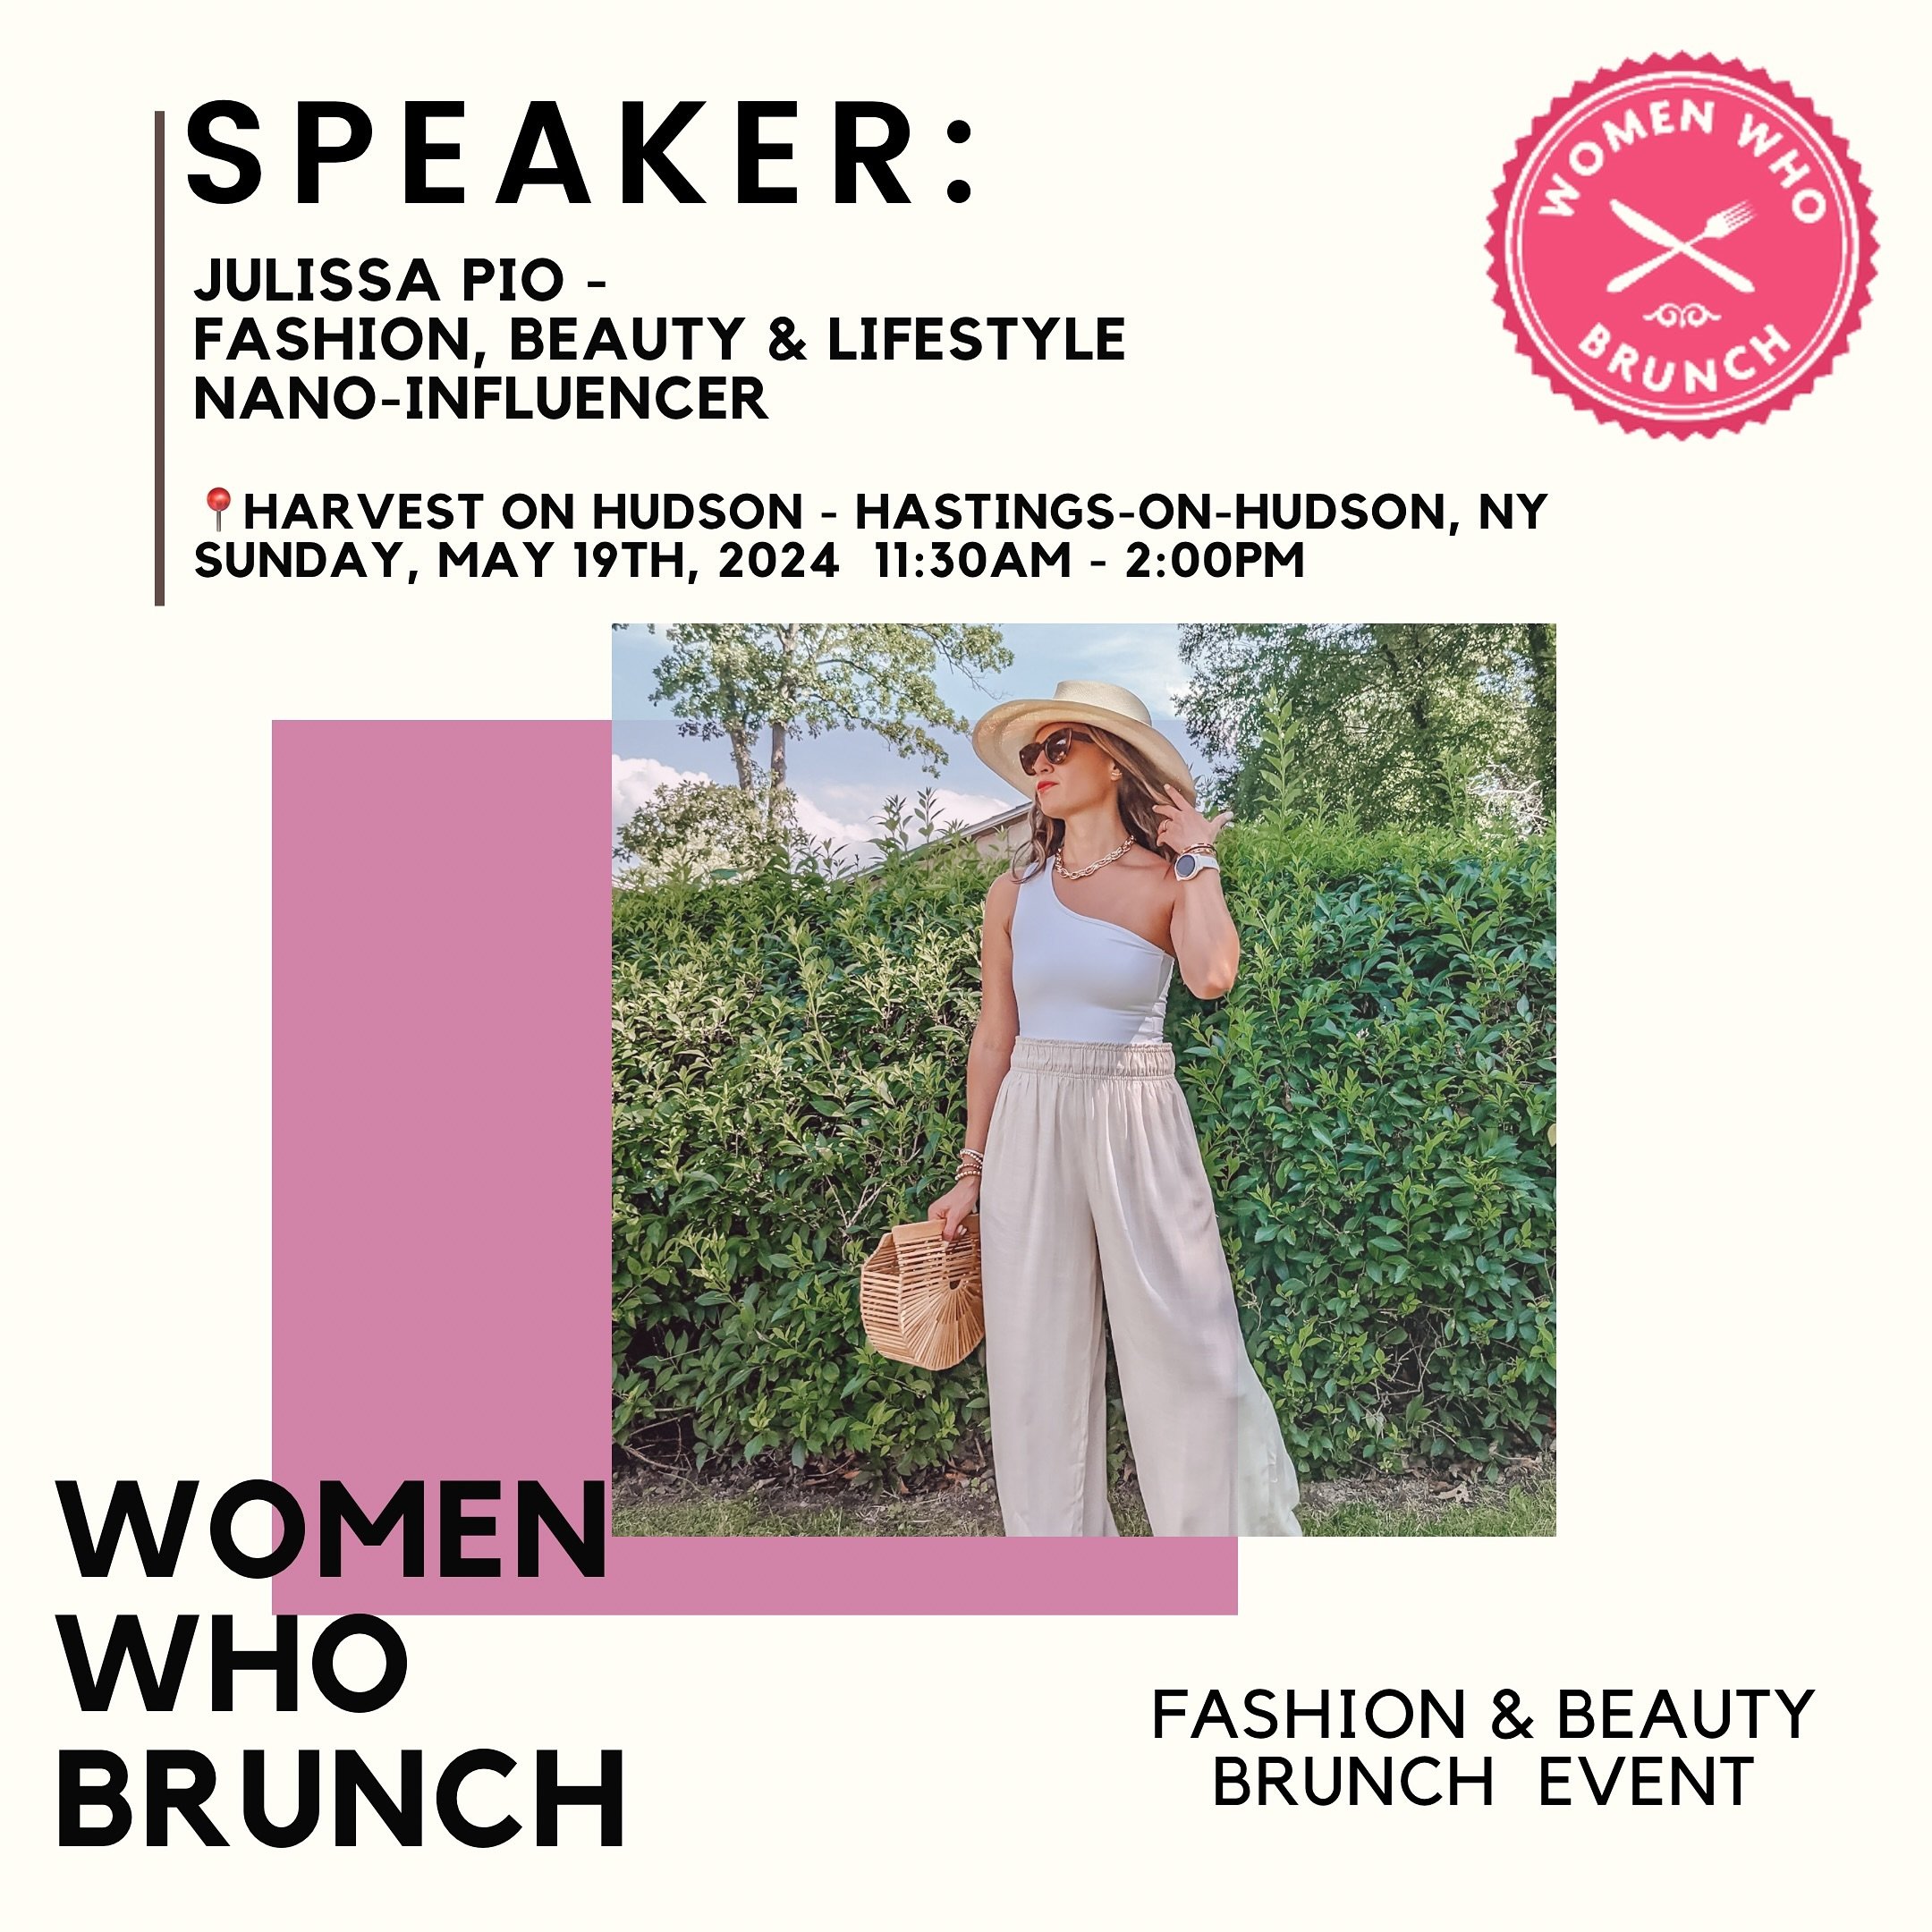 💋Mark your calendars: Sunday, May 19th is our next brunch event with @julissa.pio at @harvestonhudson in Westchester! 

👉 Brunch Topic: Fashion, Beauty, and Lifestyle. 
With a focus on your style, simple hacks to make your outfit 10x better, bigges